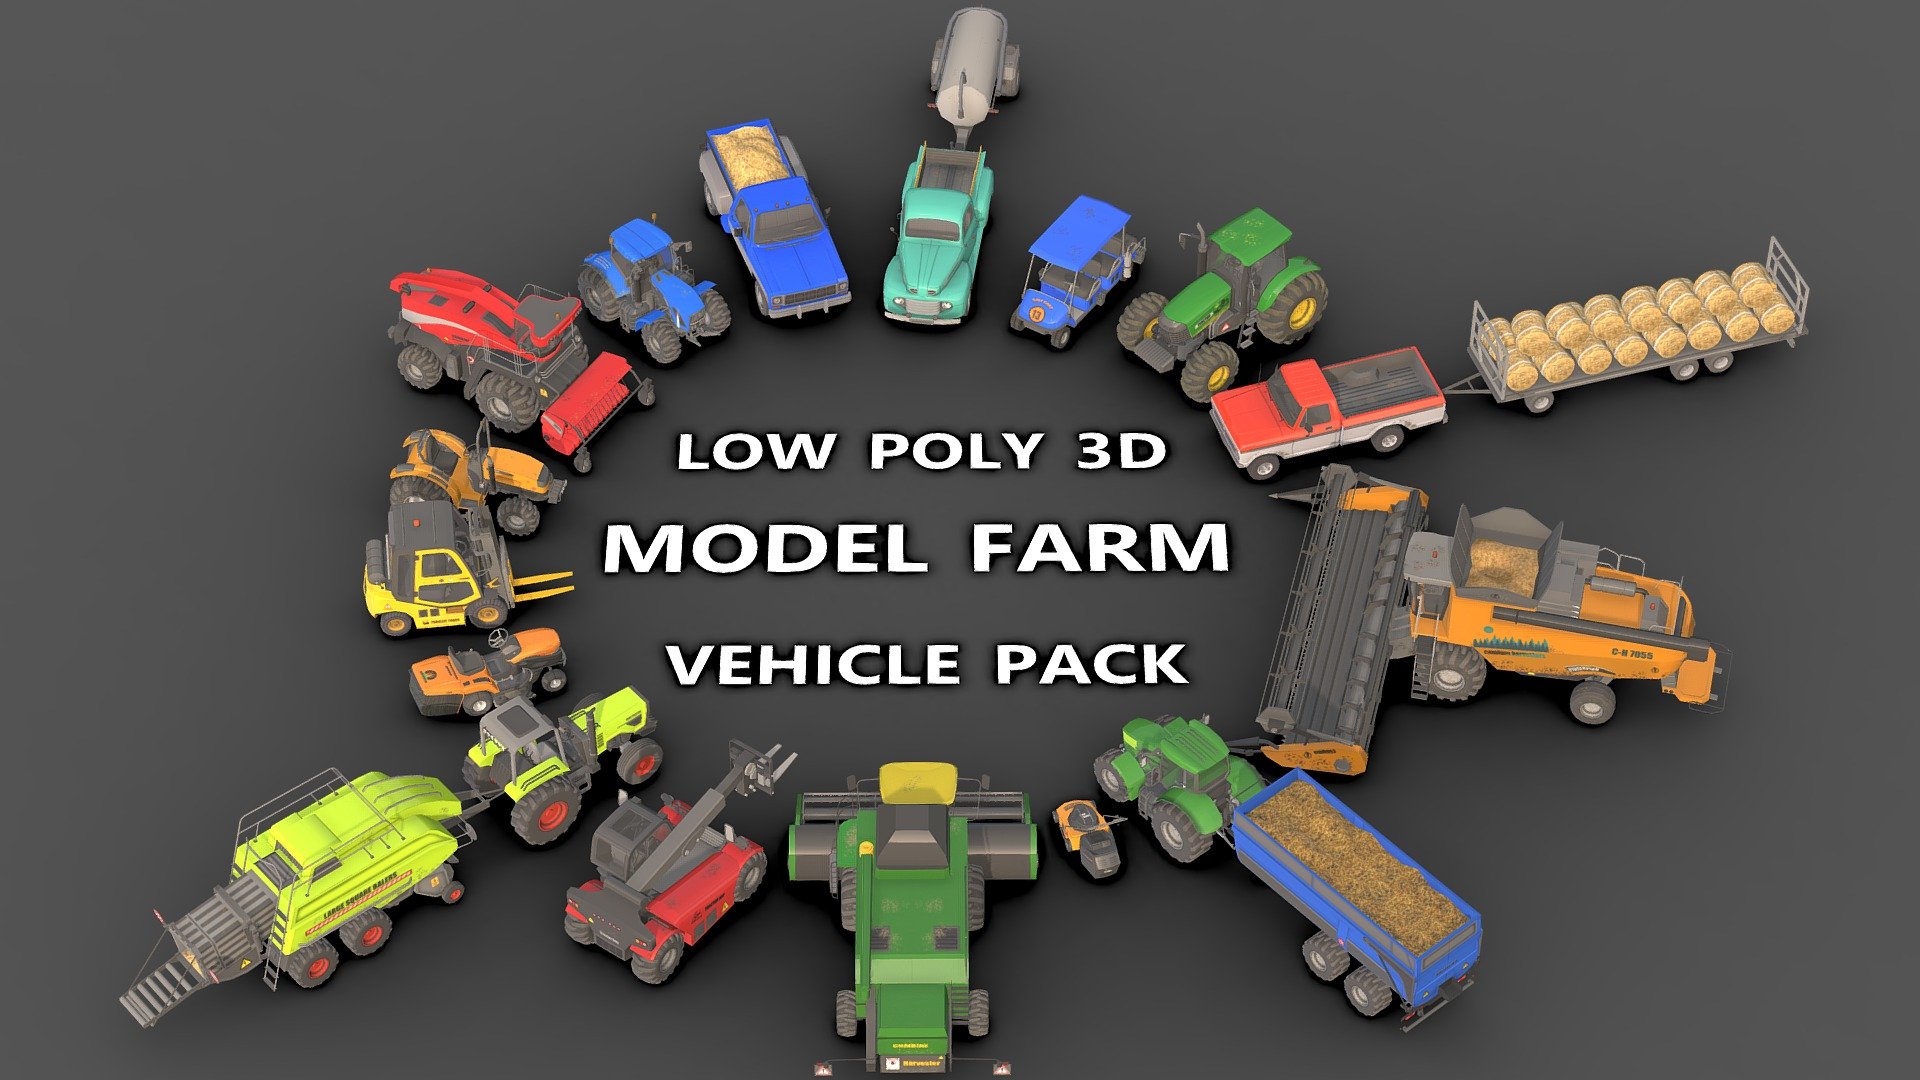 3D model Farm Vehicle Pack  .

This package includes 20 vehicles that are available to you with a 40% discount .

You can use these models in any game and project.

This model is made with order and precision.

Textures format is PNG.

Separated parts (body. wheels.Steer).

Very low poly.

Average poly count: 15/000 Tris.

Texture size: 1024/2048(PNG).

Each model has 2 to 4 textures .

Each model has 2 or 4 materials .

The parts are separated.

format: fbx, obj, 3d max.

The original files are in the Additional file .

Wait for my new models.. Your friend (Sidra) 3d model